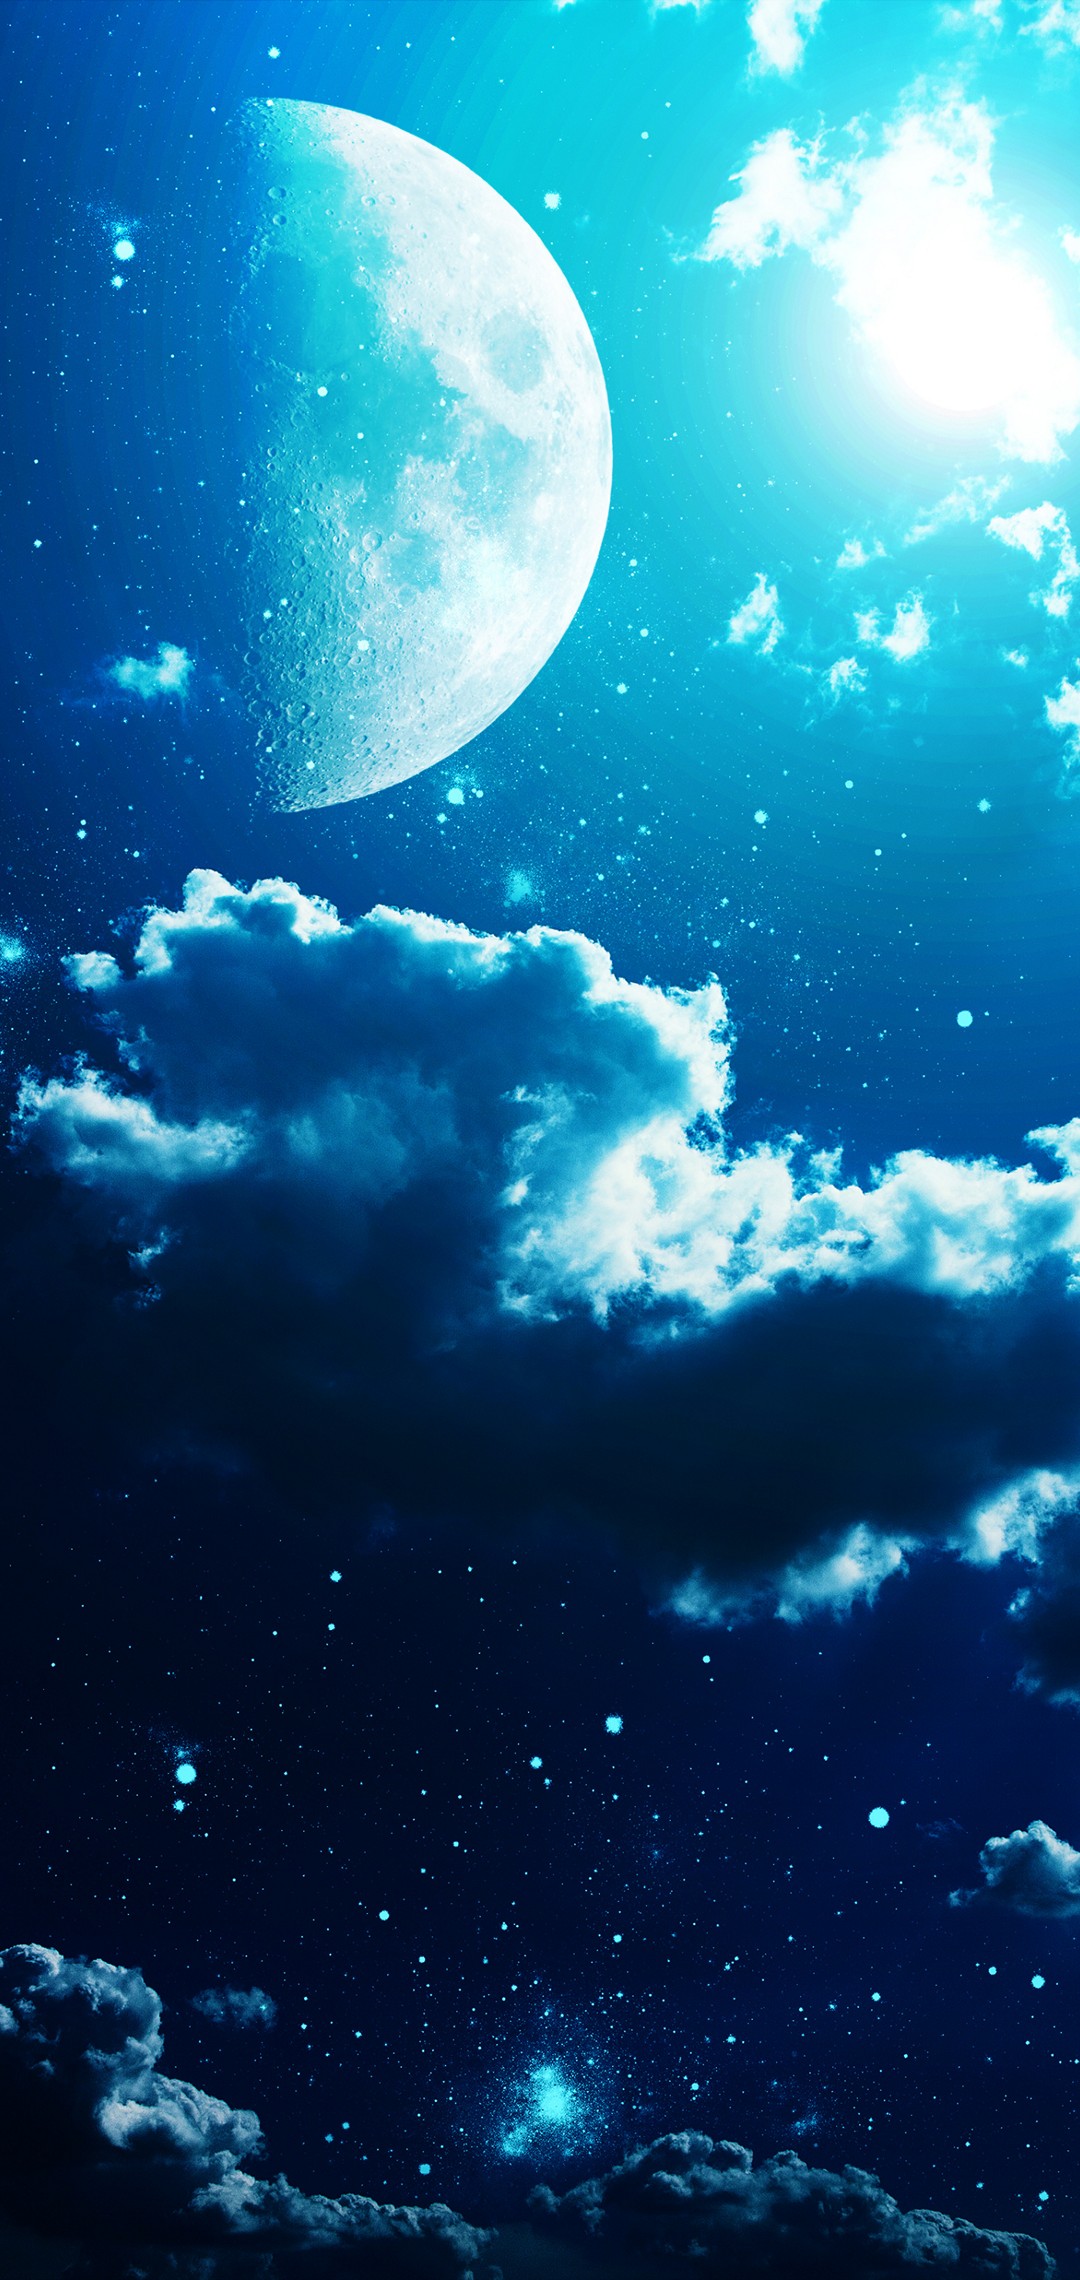 Update 70+ night sky moon and stars wallpaper - in.cdgdbentre